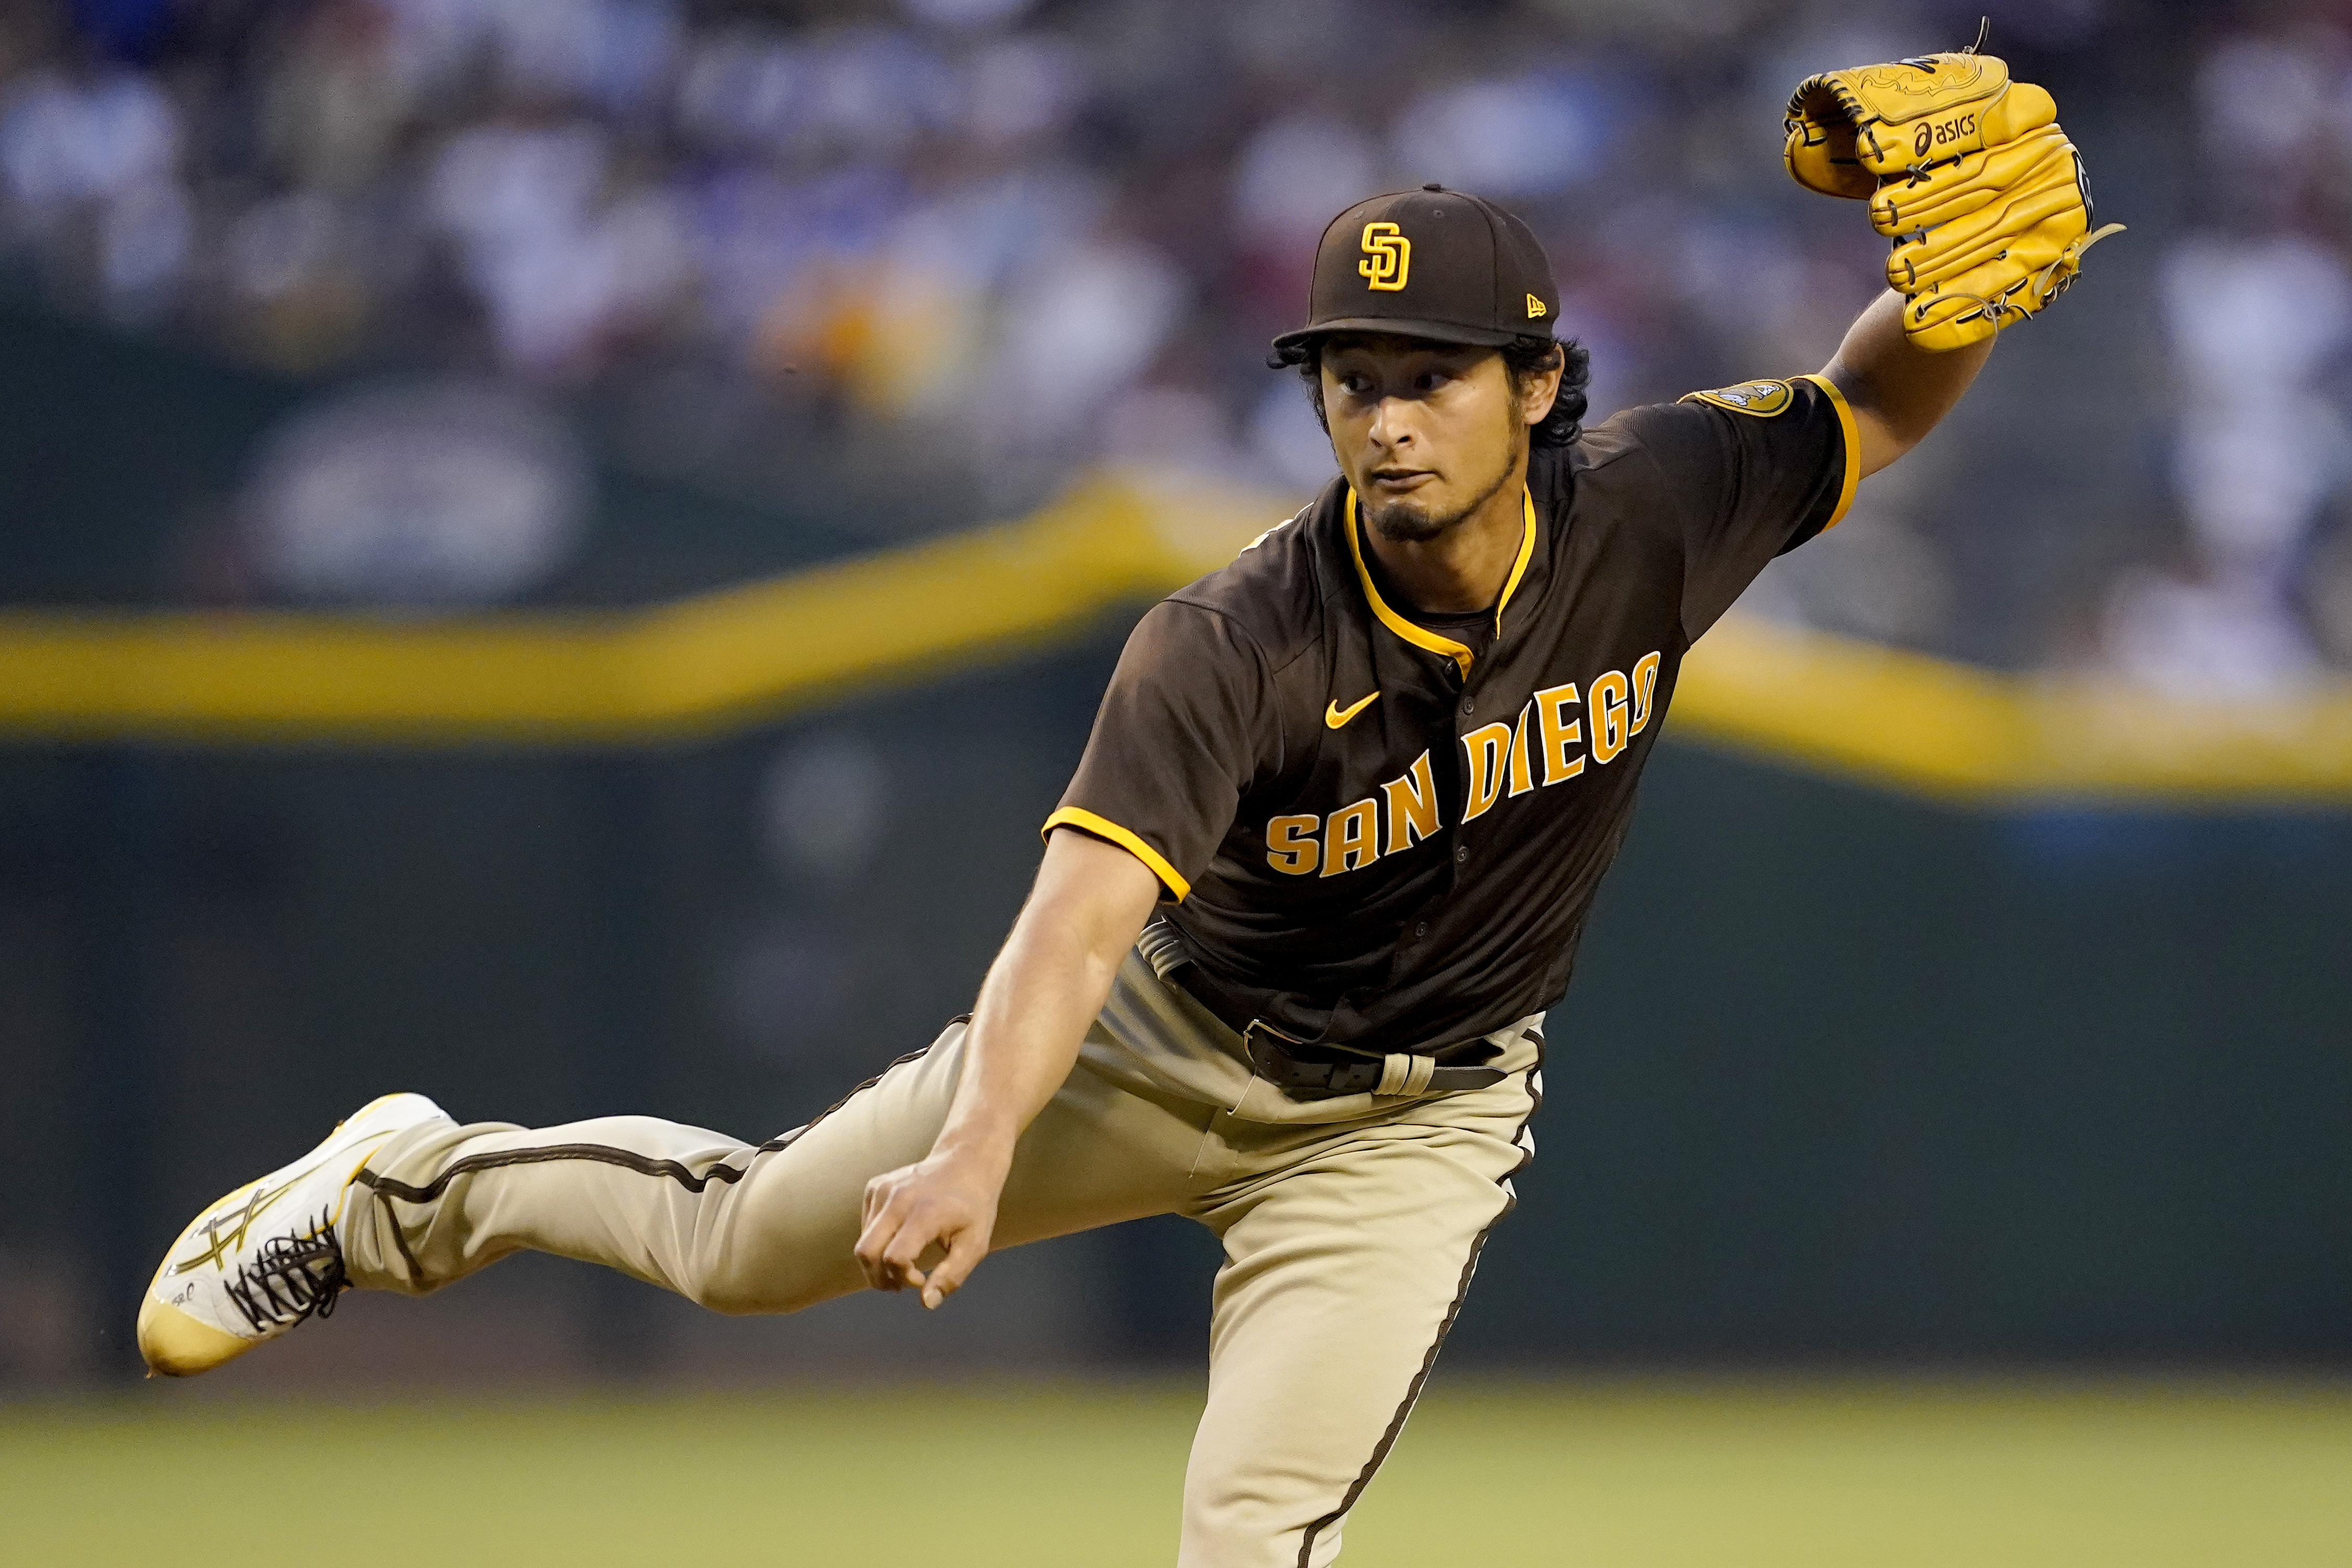 Padres, Cruising Thanks to Darvish, 4 Home Runs, Stun Mets in Wild Card  Series with 7-1 Win - Times of San Diego